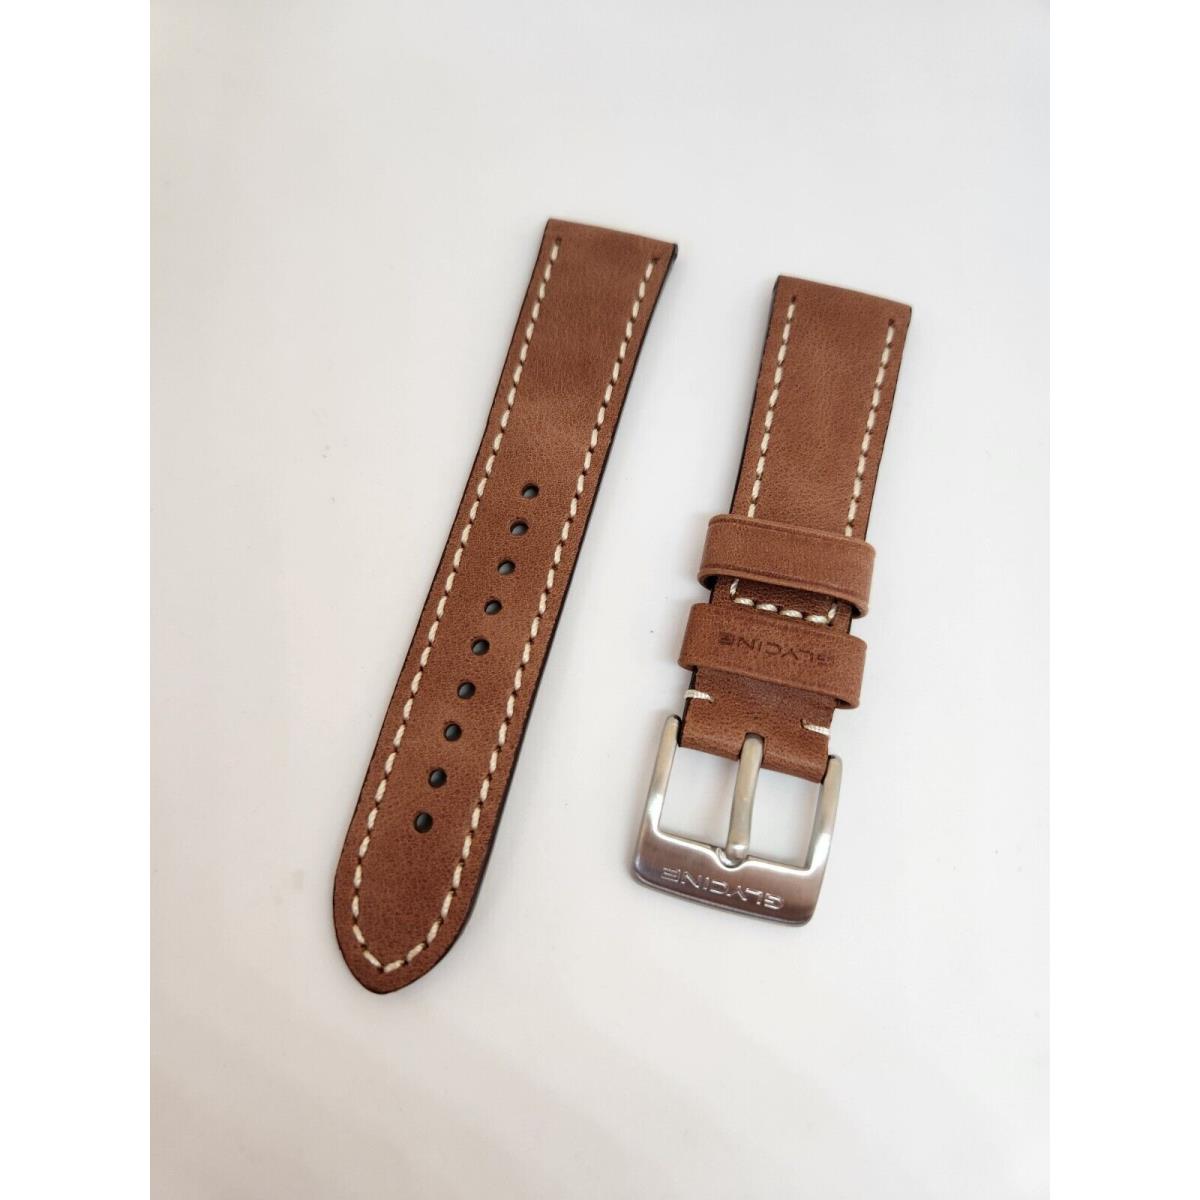 Oem Glycine Airman 22mm Brown Leather Strap Band Bracelet with Steel Buckle